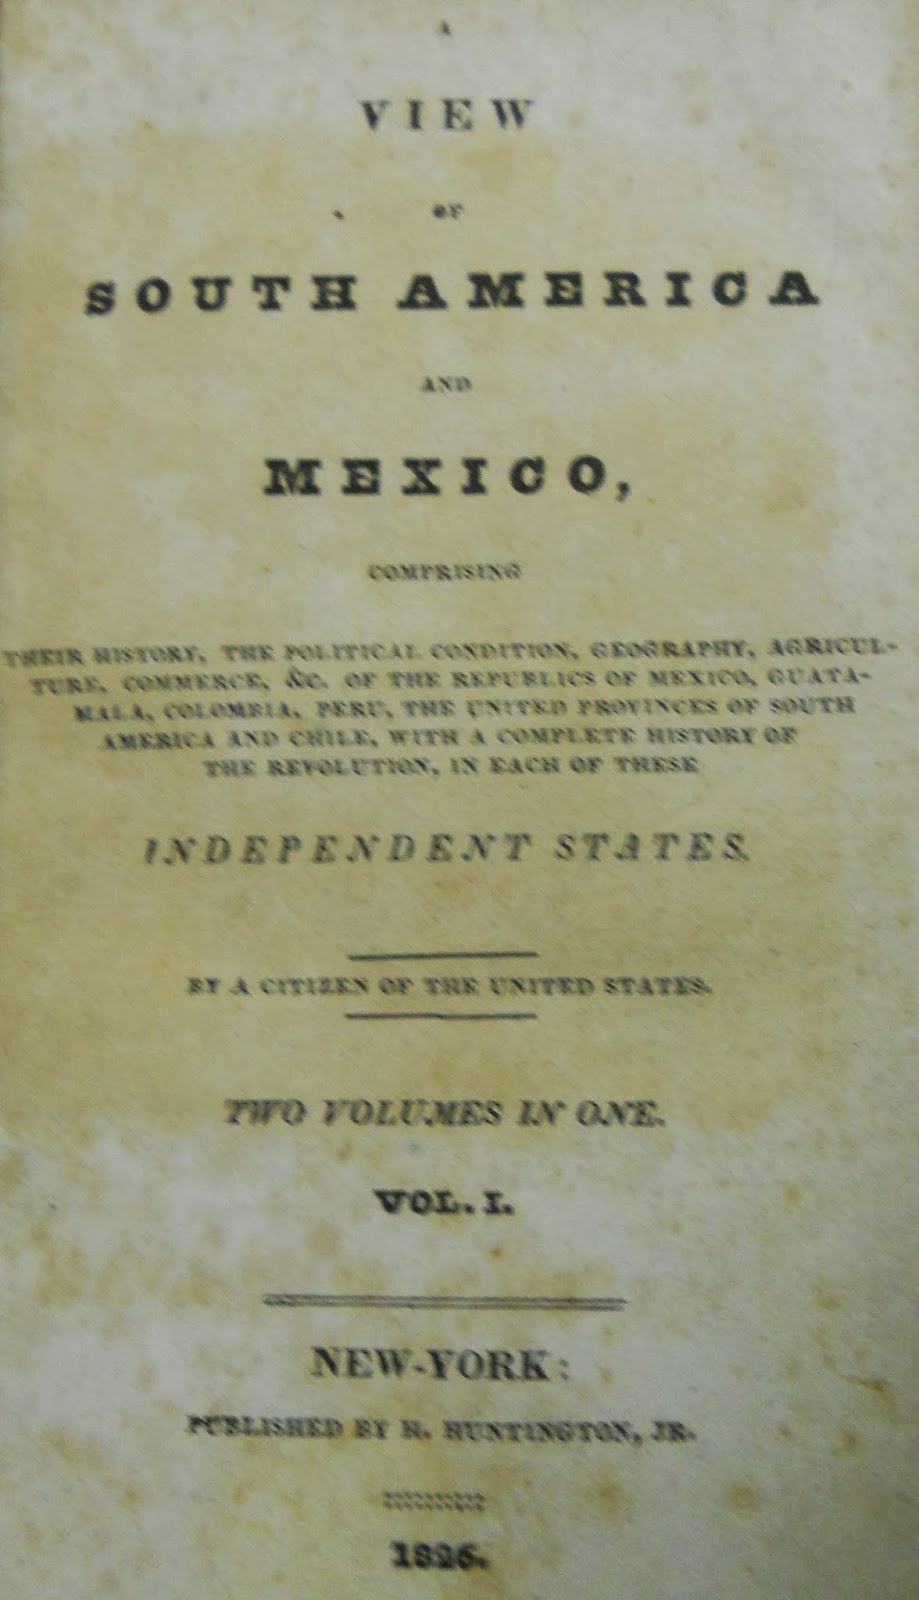 Document titled "View of South America and Mexico"